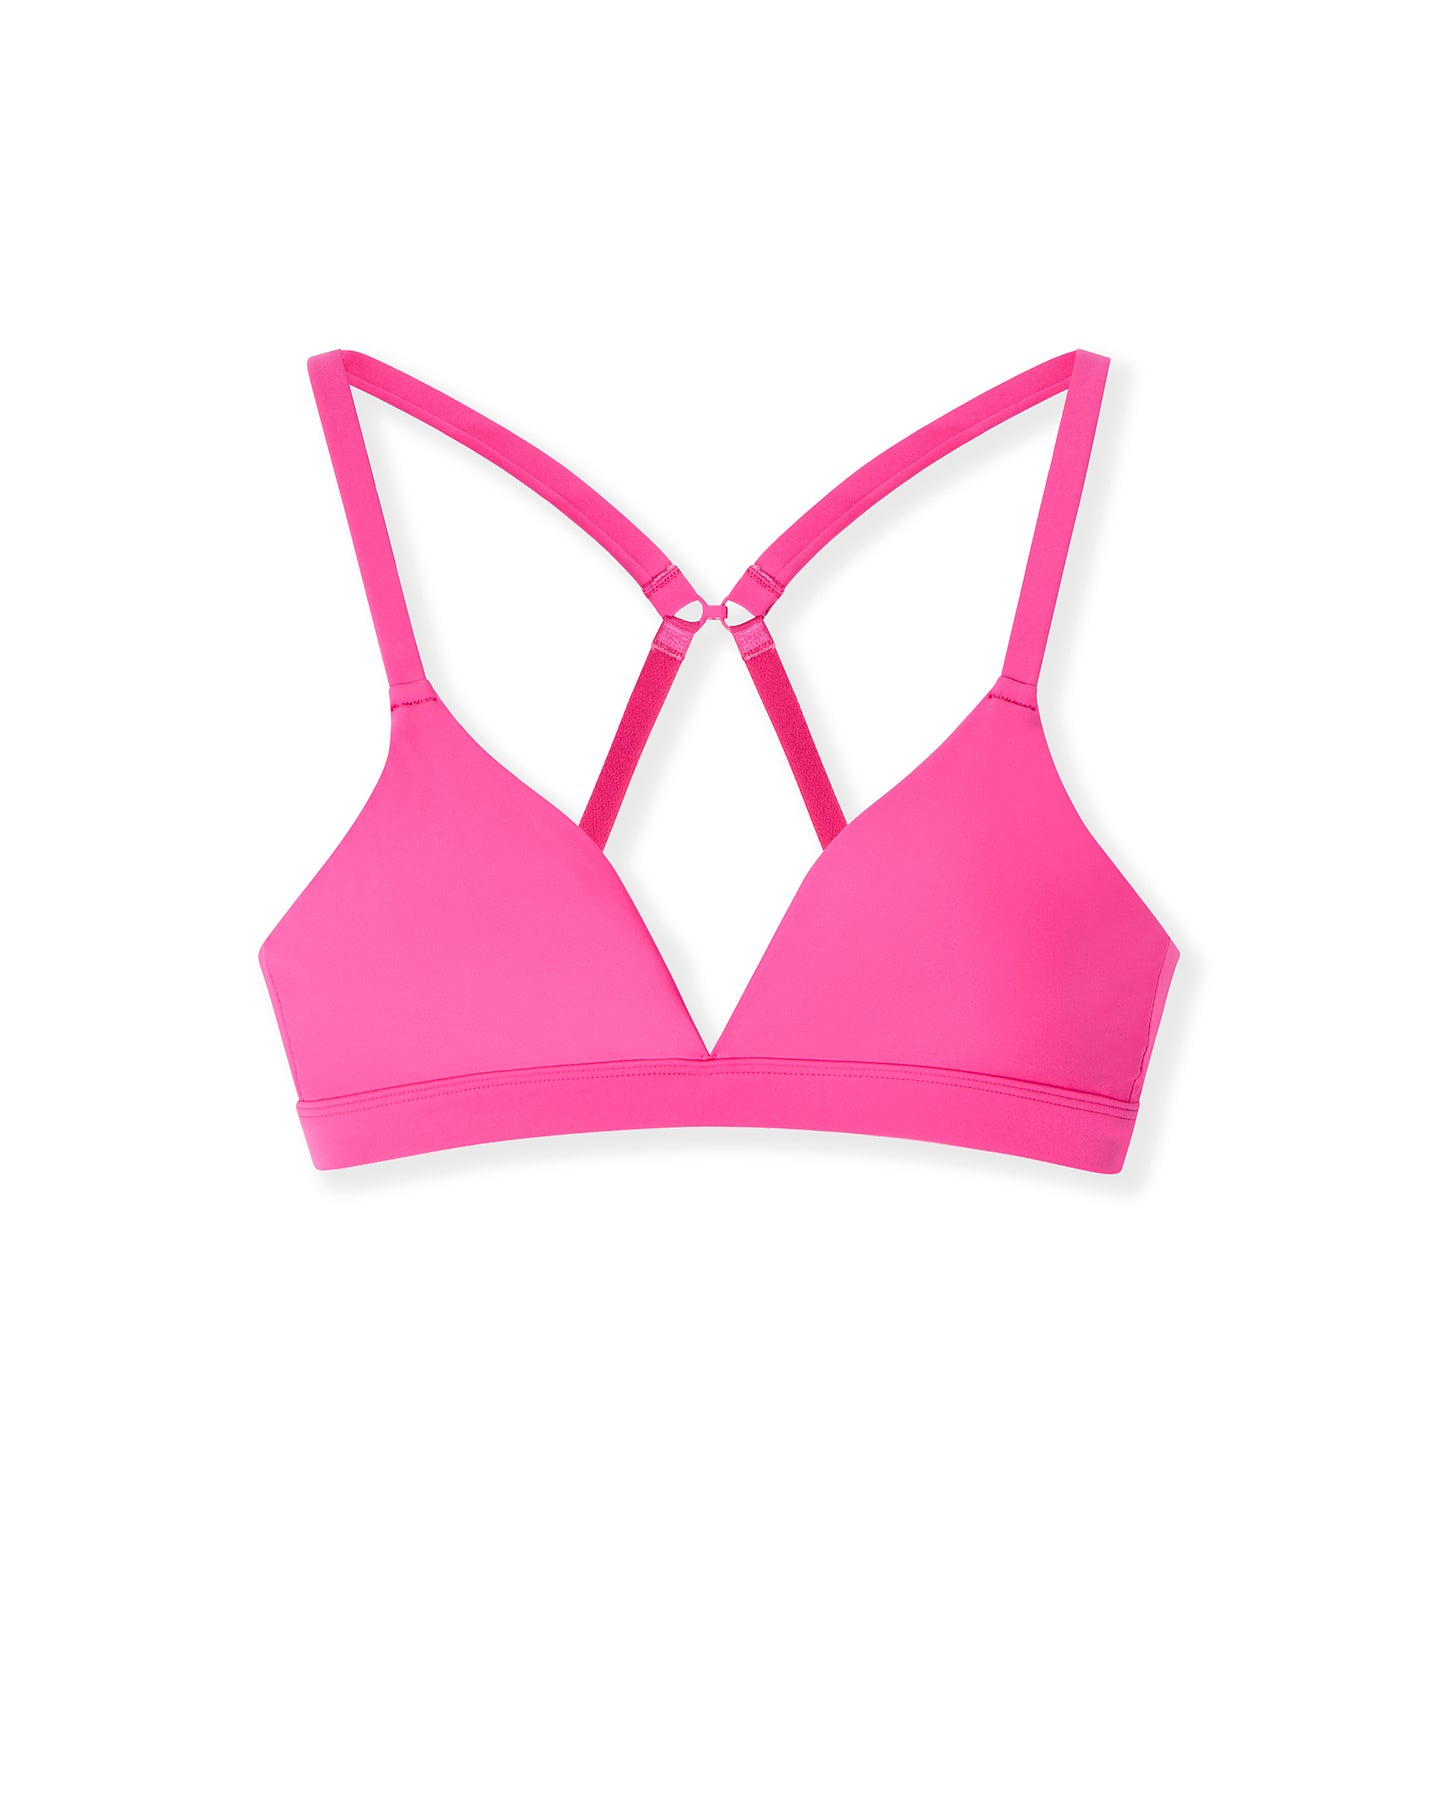 Victorias Secret PINK Limited Edition Date Push-Up Padded Sexy Strappy Bra